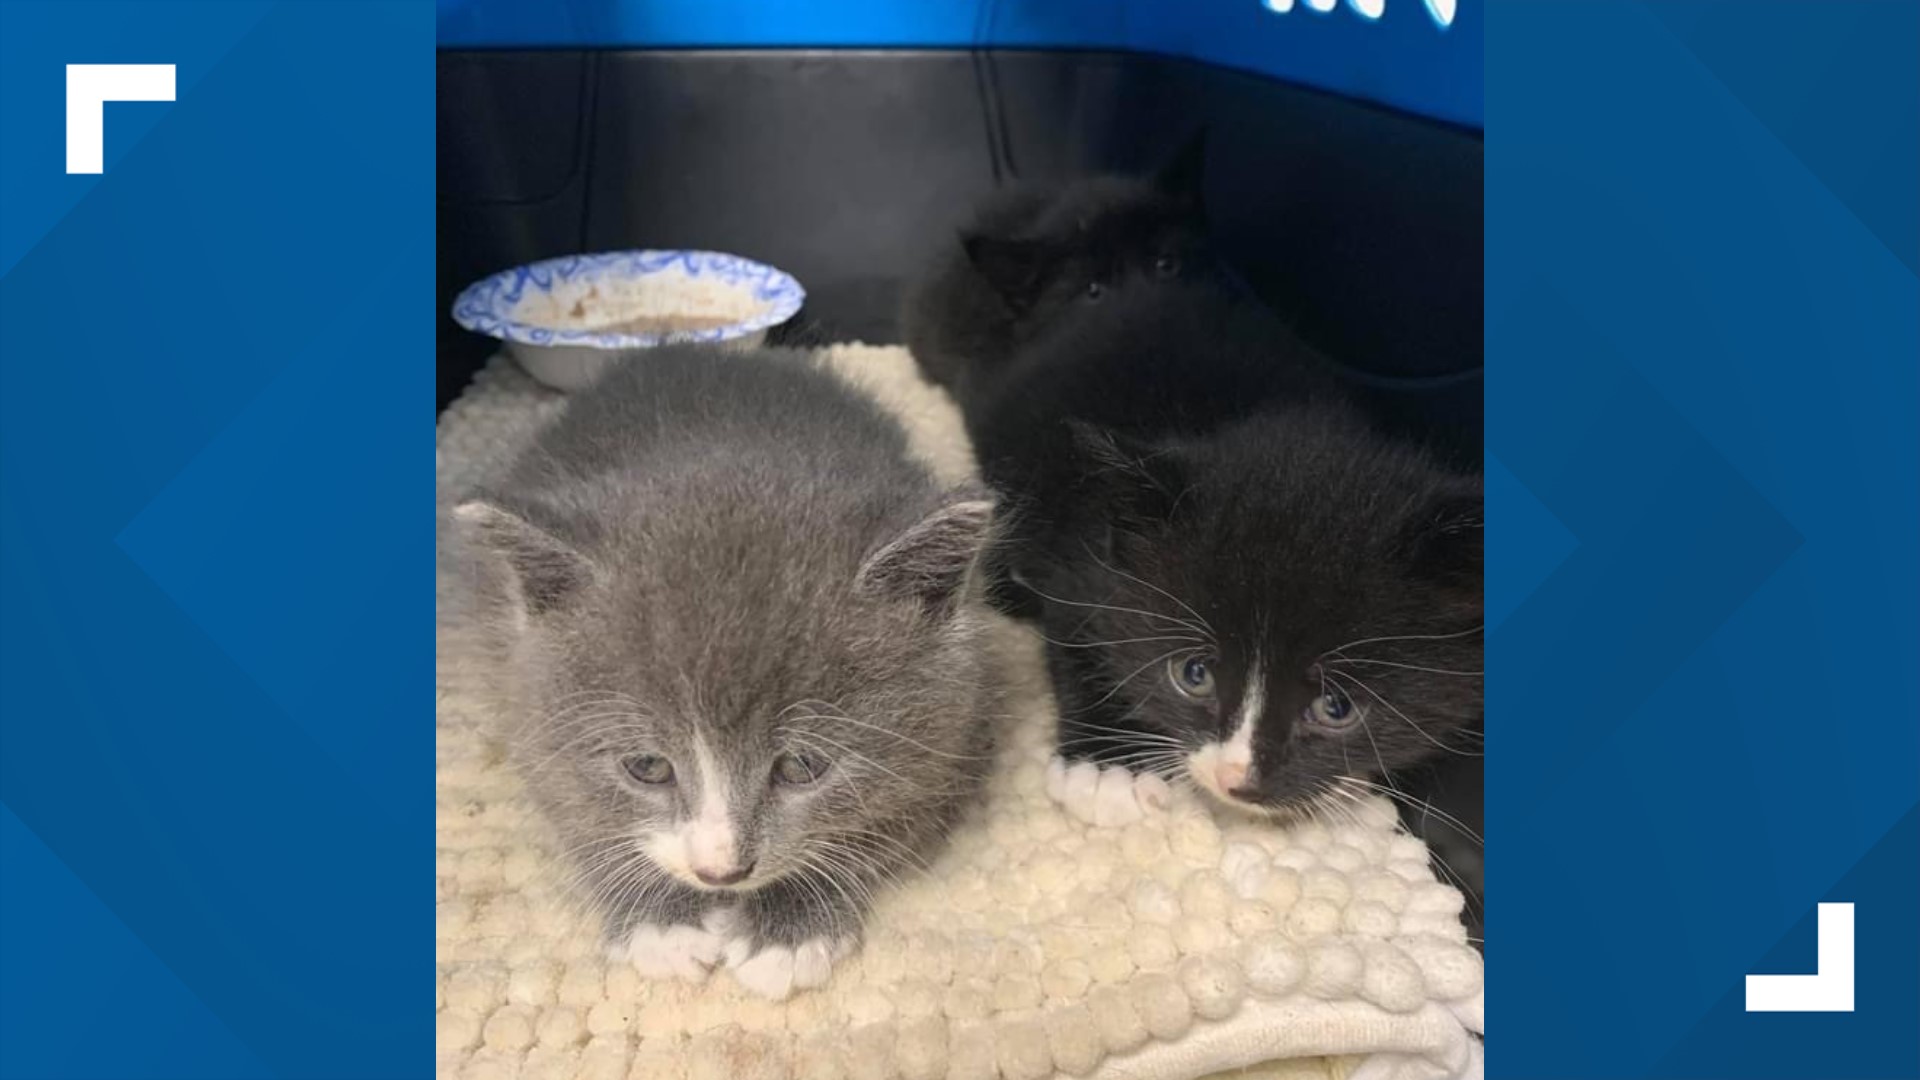 Kittens found in Tonawanda dumpster; Local cat rescue group issues